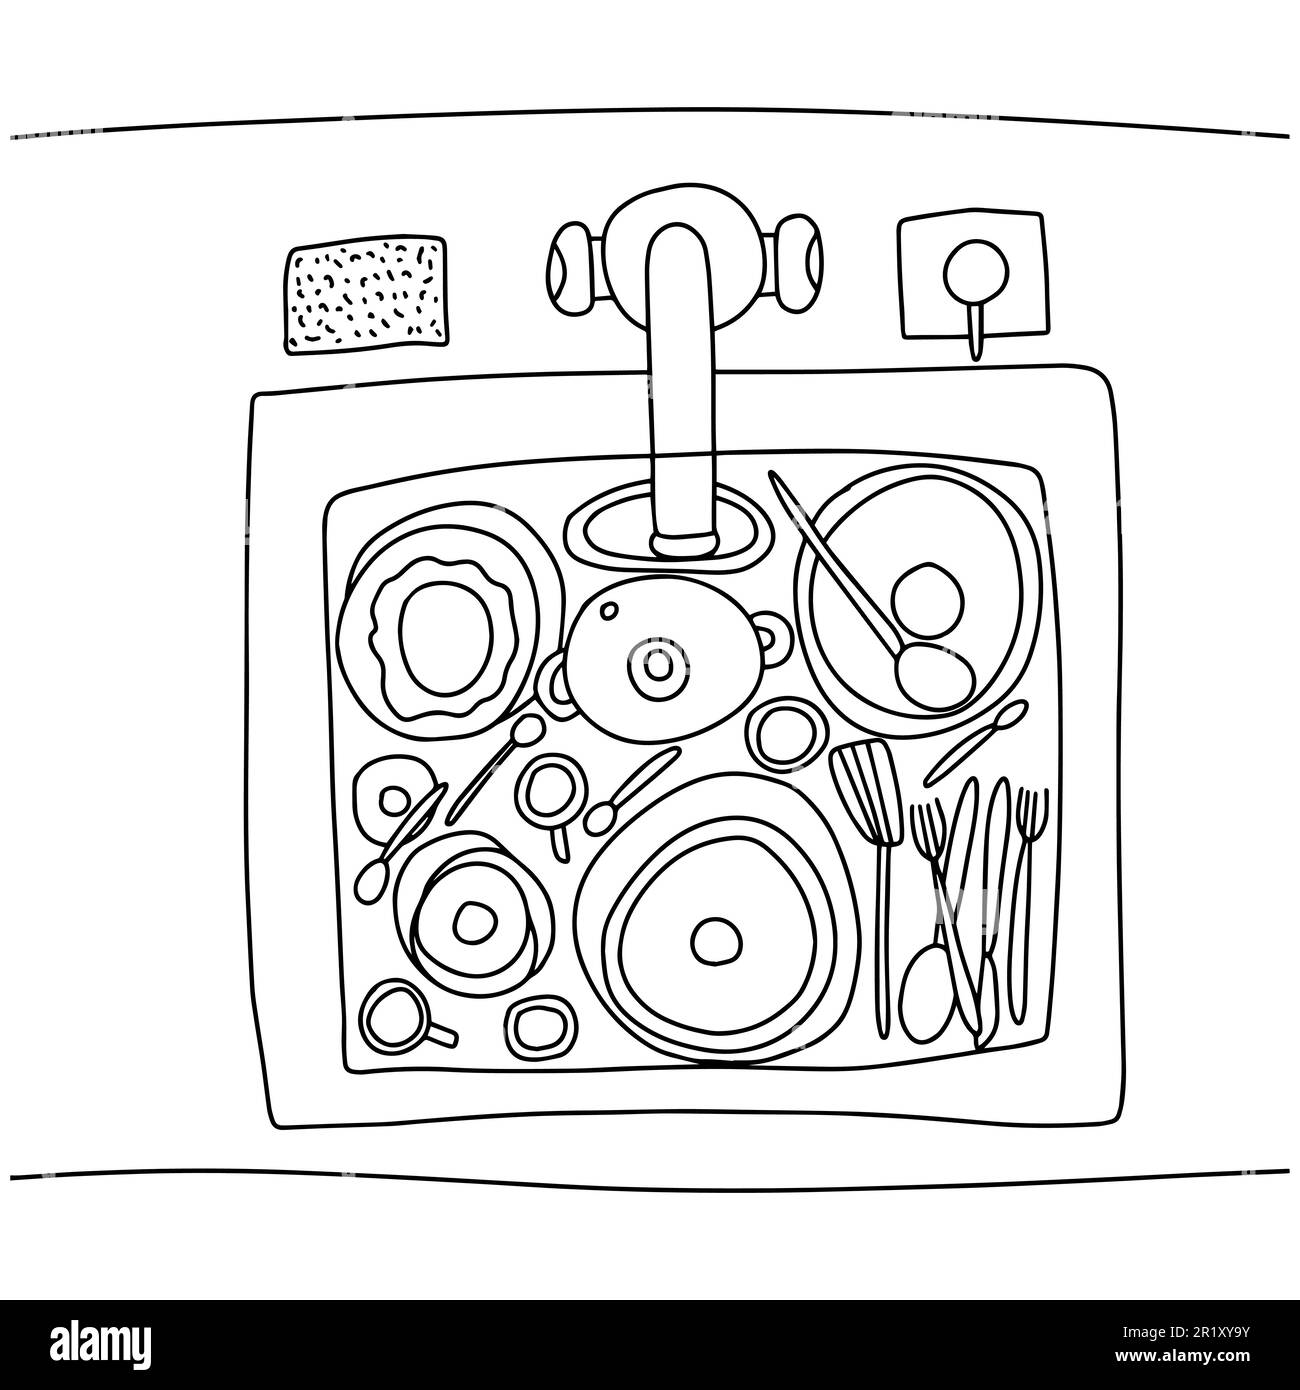 Coloring page with kitchen sink stock vector image art